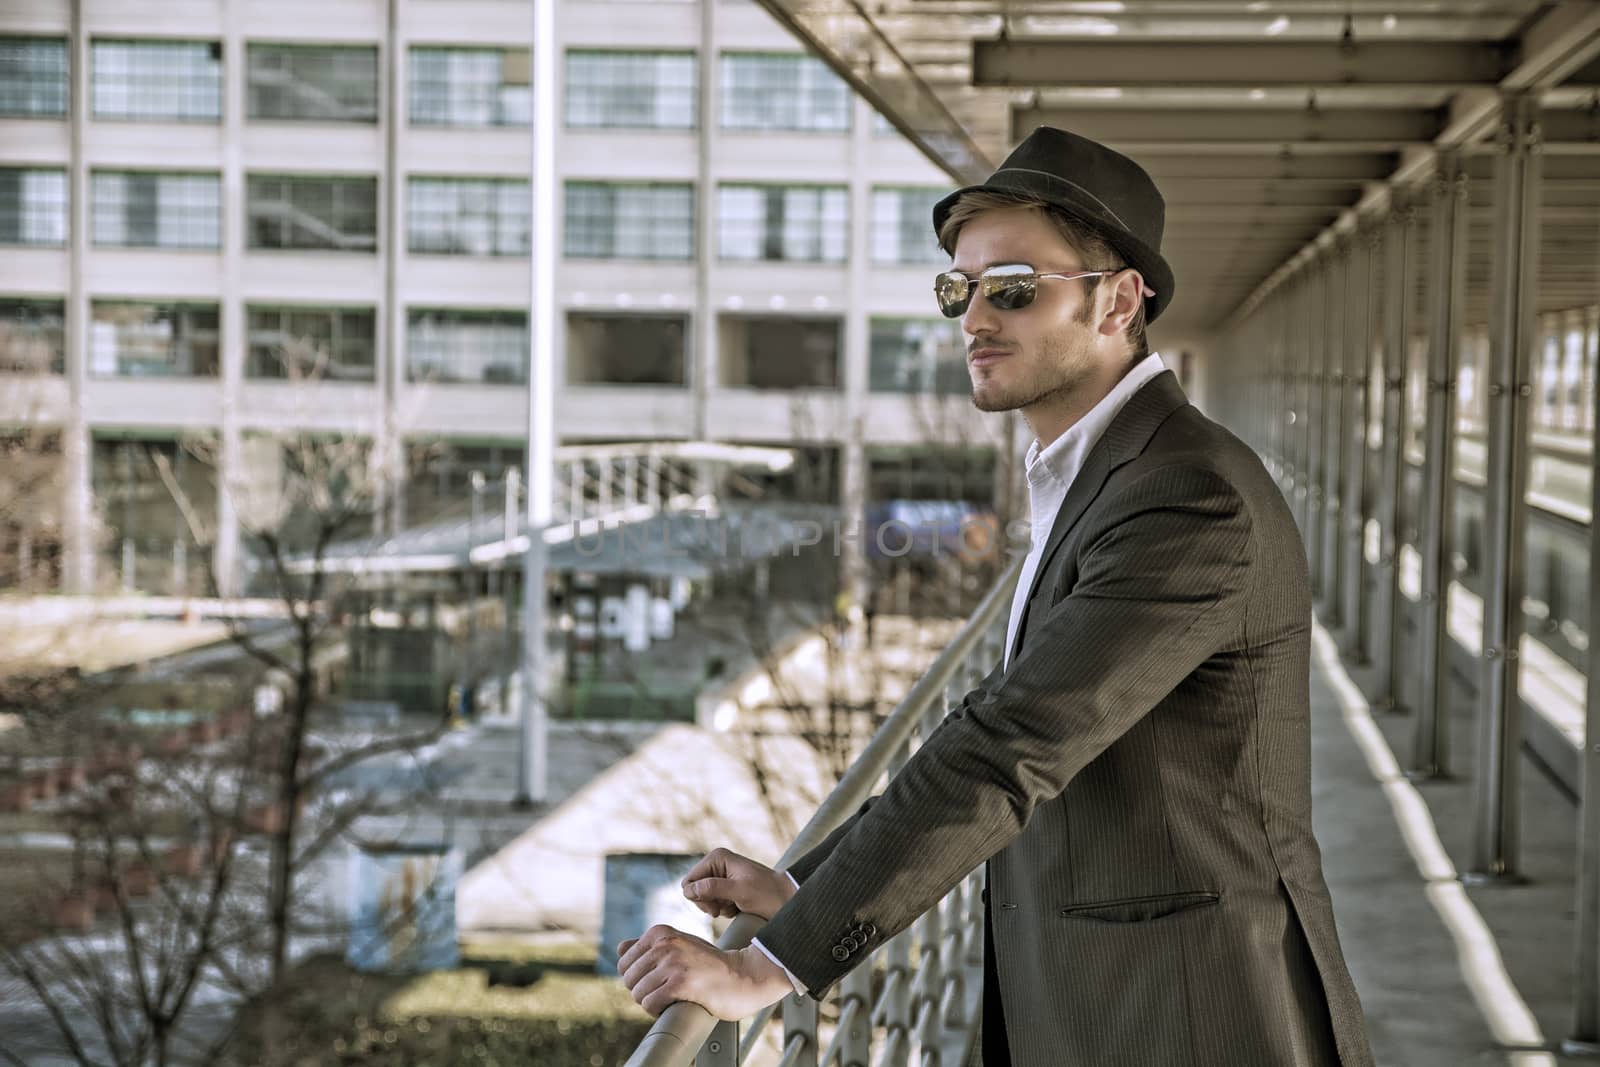 Head and Shoulders Portrait of Stylist Young Man Wearing Suit and Hat Looking to the Side Out Window While Standing on Moving Sidewalk in Building